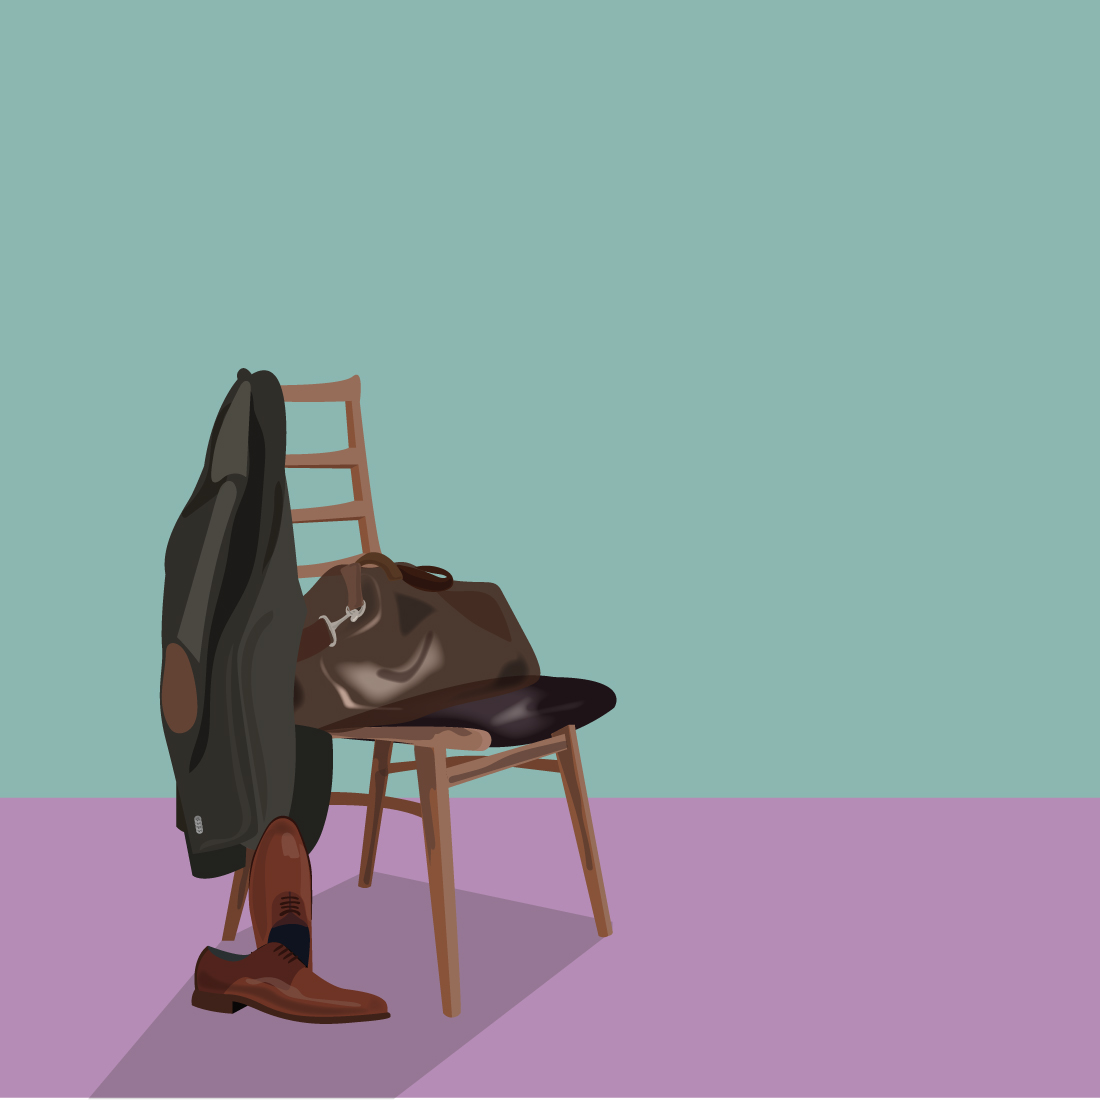 Cloth Hanging on the chair illustration preview image.